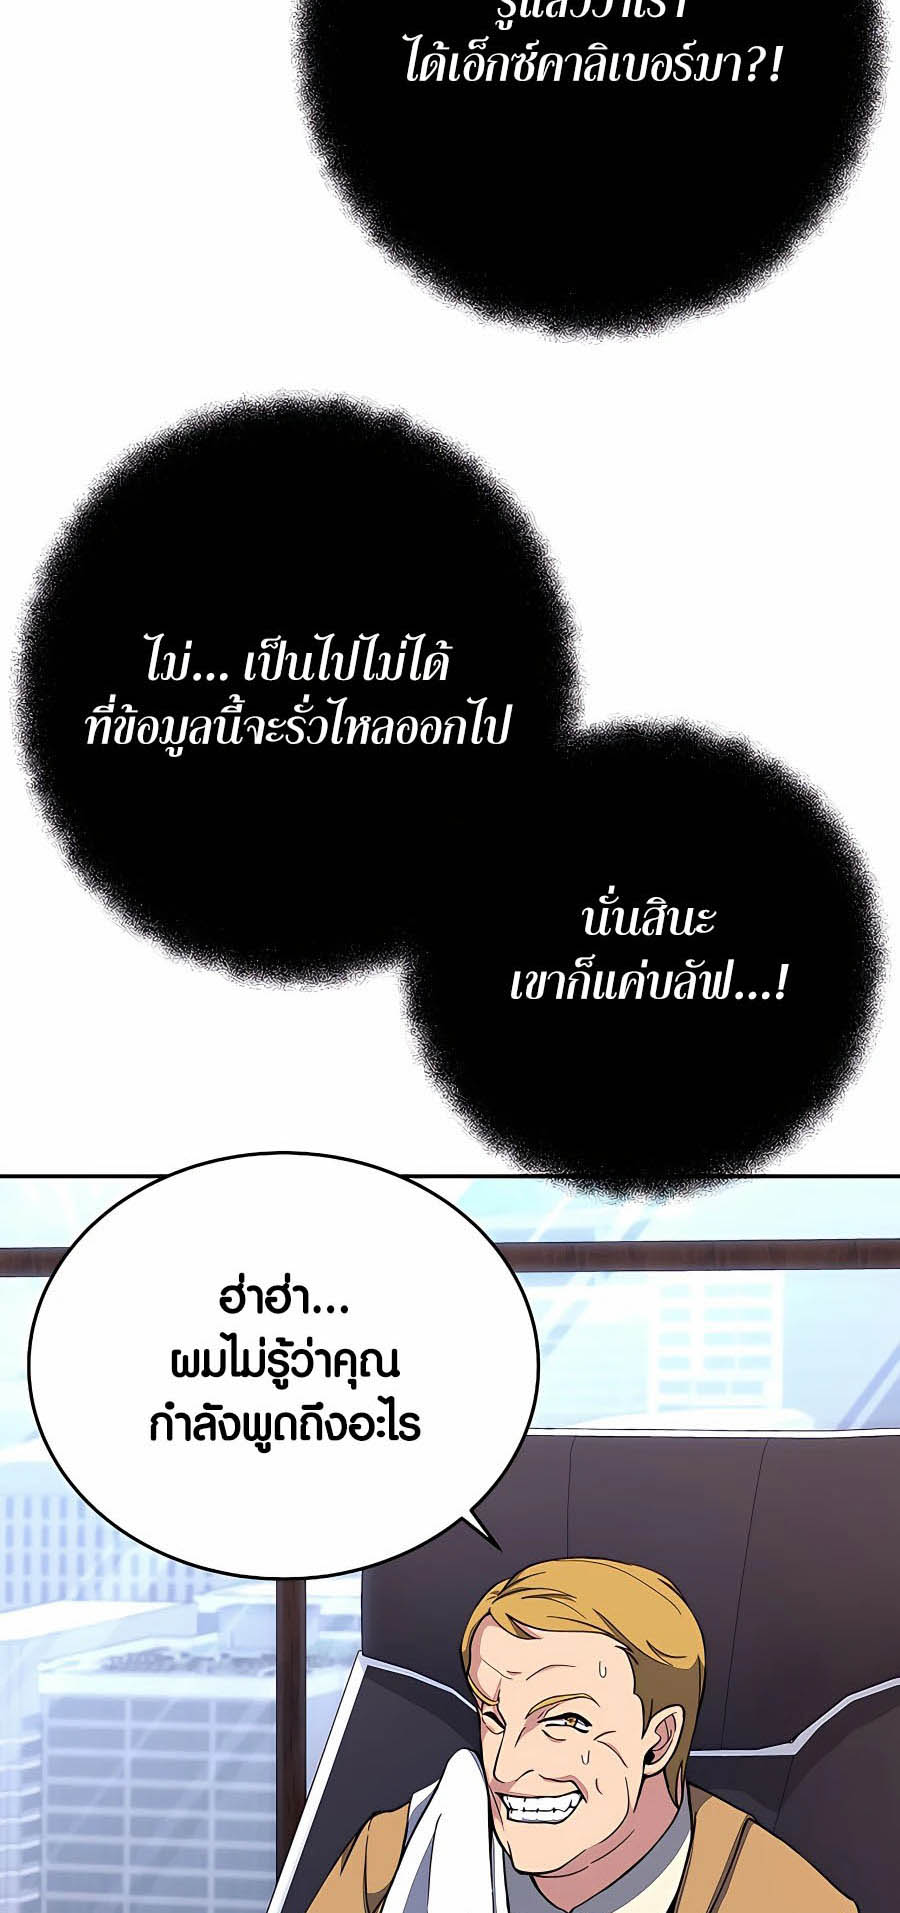 à¸­à¹ˆà¸²à¸™à¸¡à¸±à¸™à¸®à¸§à¸² à¹€à¸£à¸·à¹ˆà¸­à¸‡ The Part Time Land of the Gods 56 31